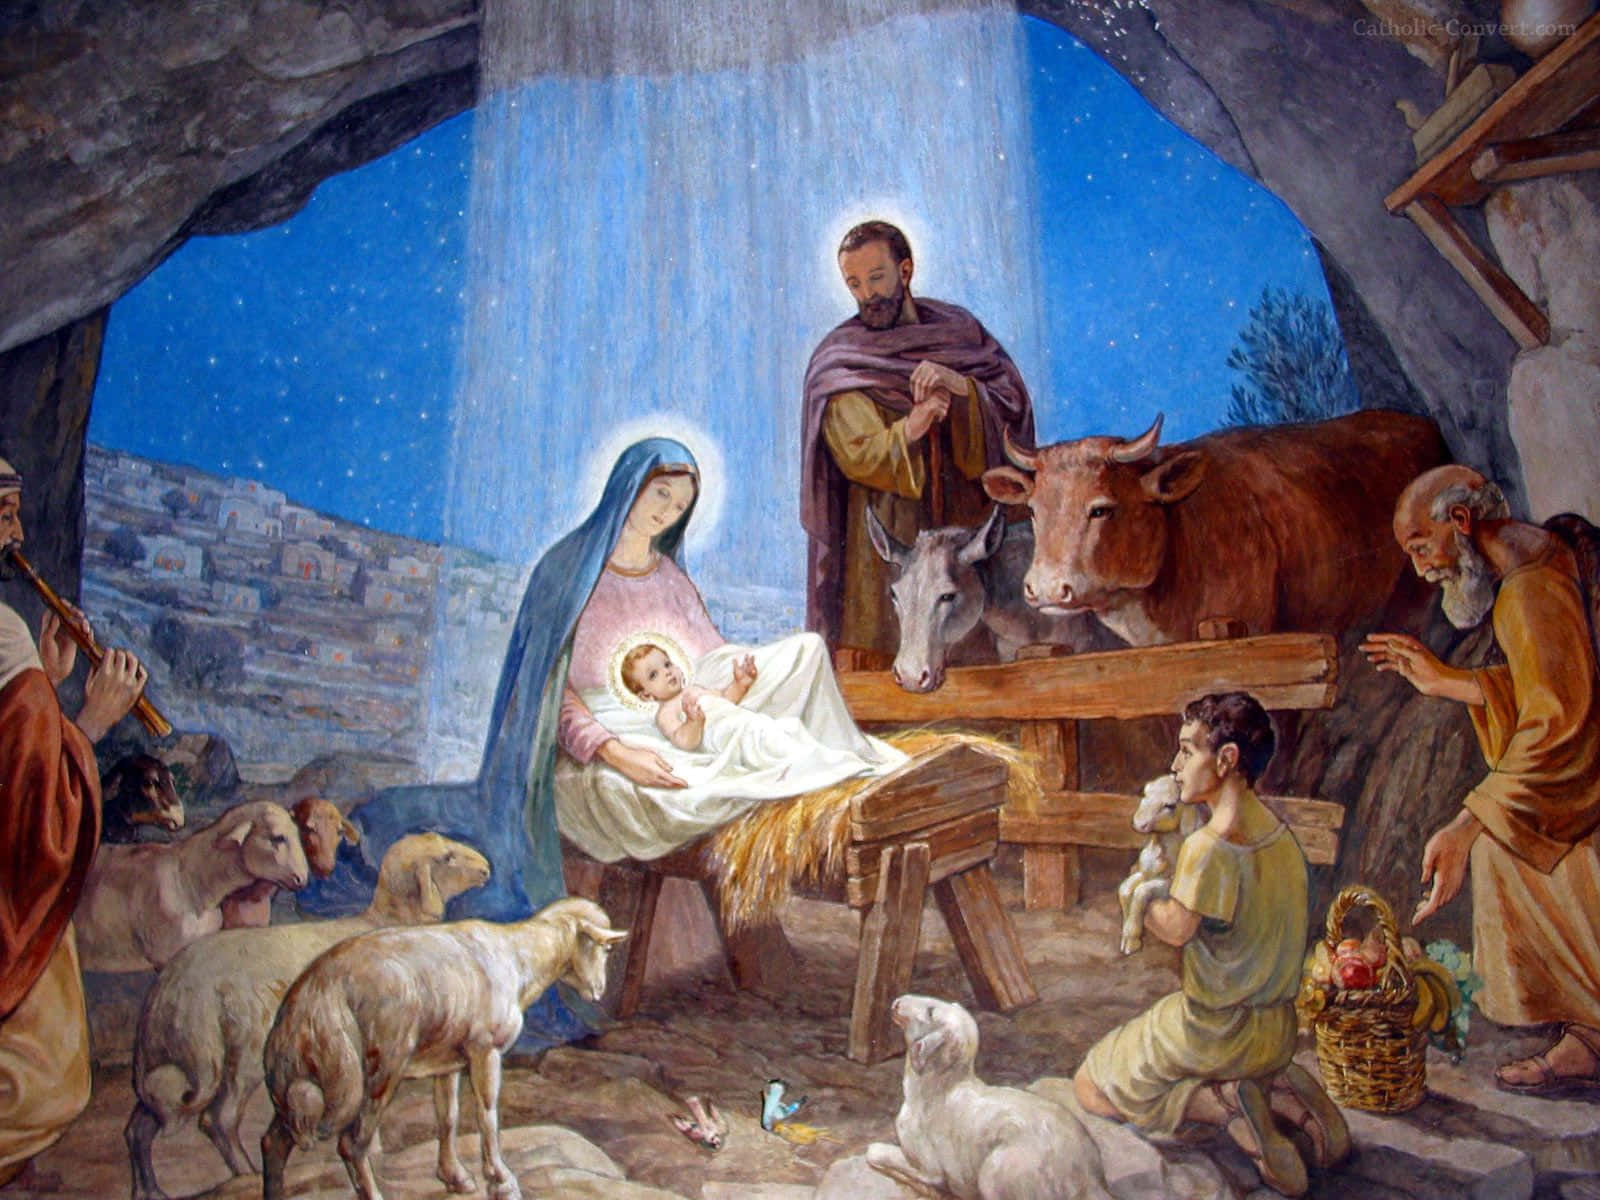 The Wise Men Bring Gifts to the Holy Family